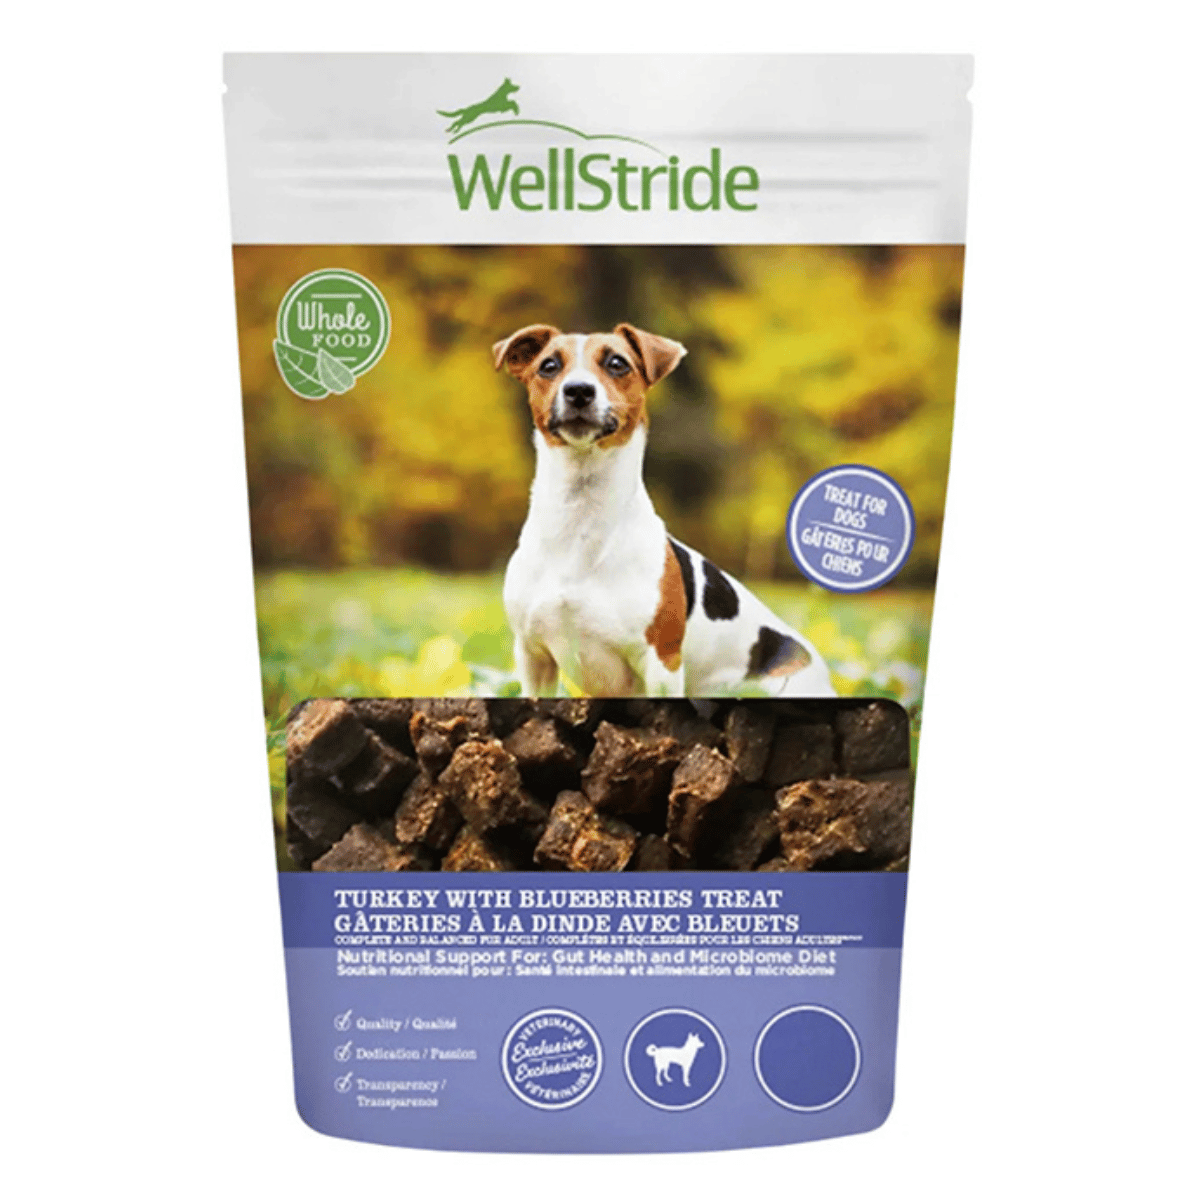 Wellstride Turkey with Blueberries Treats for Dogs